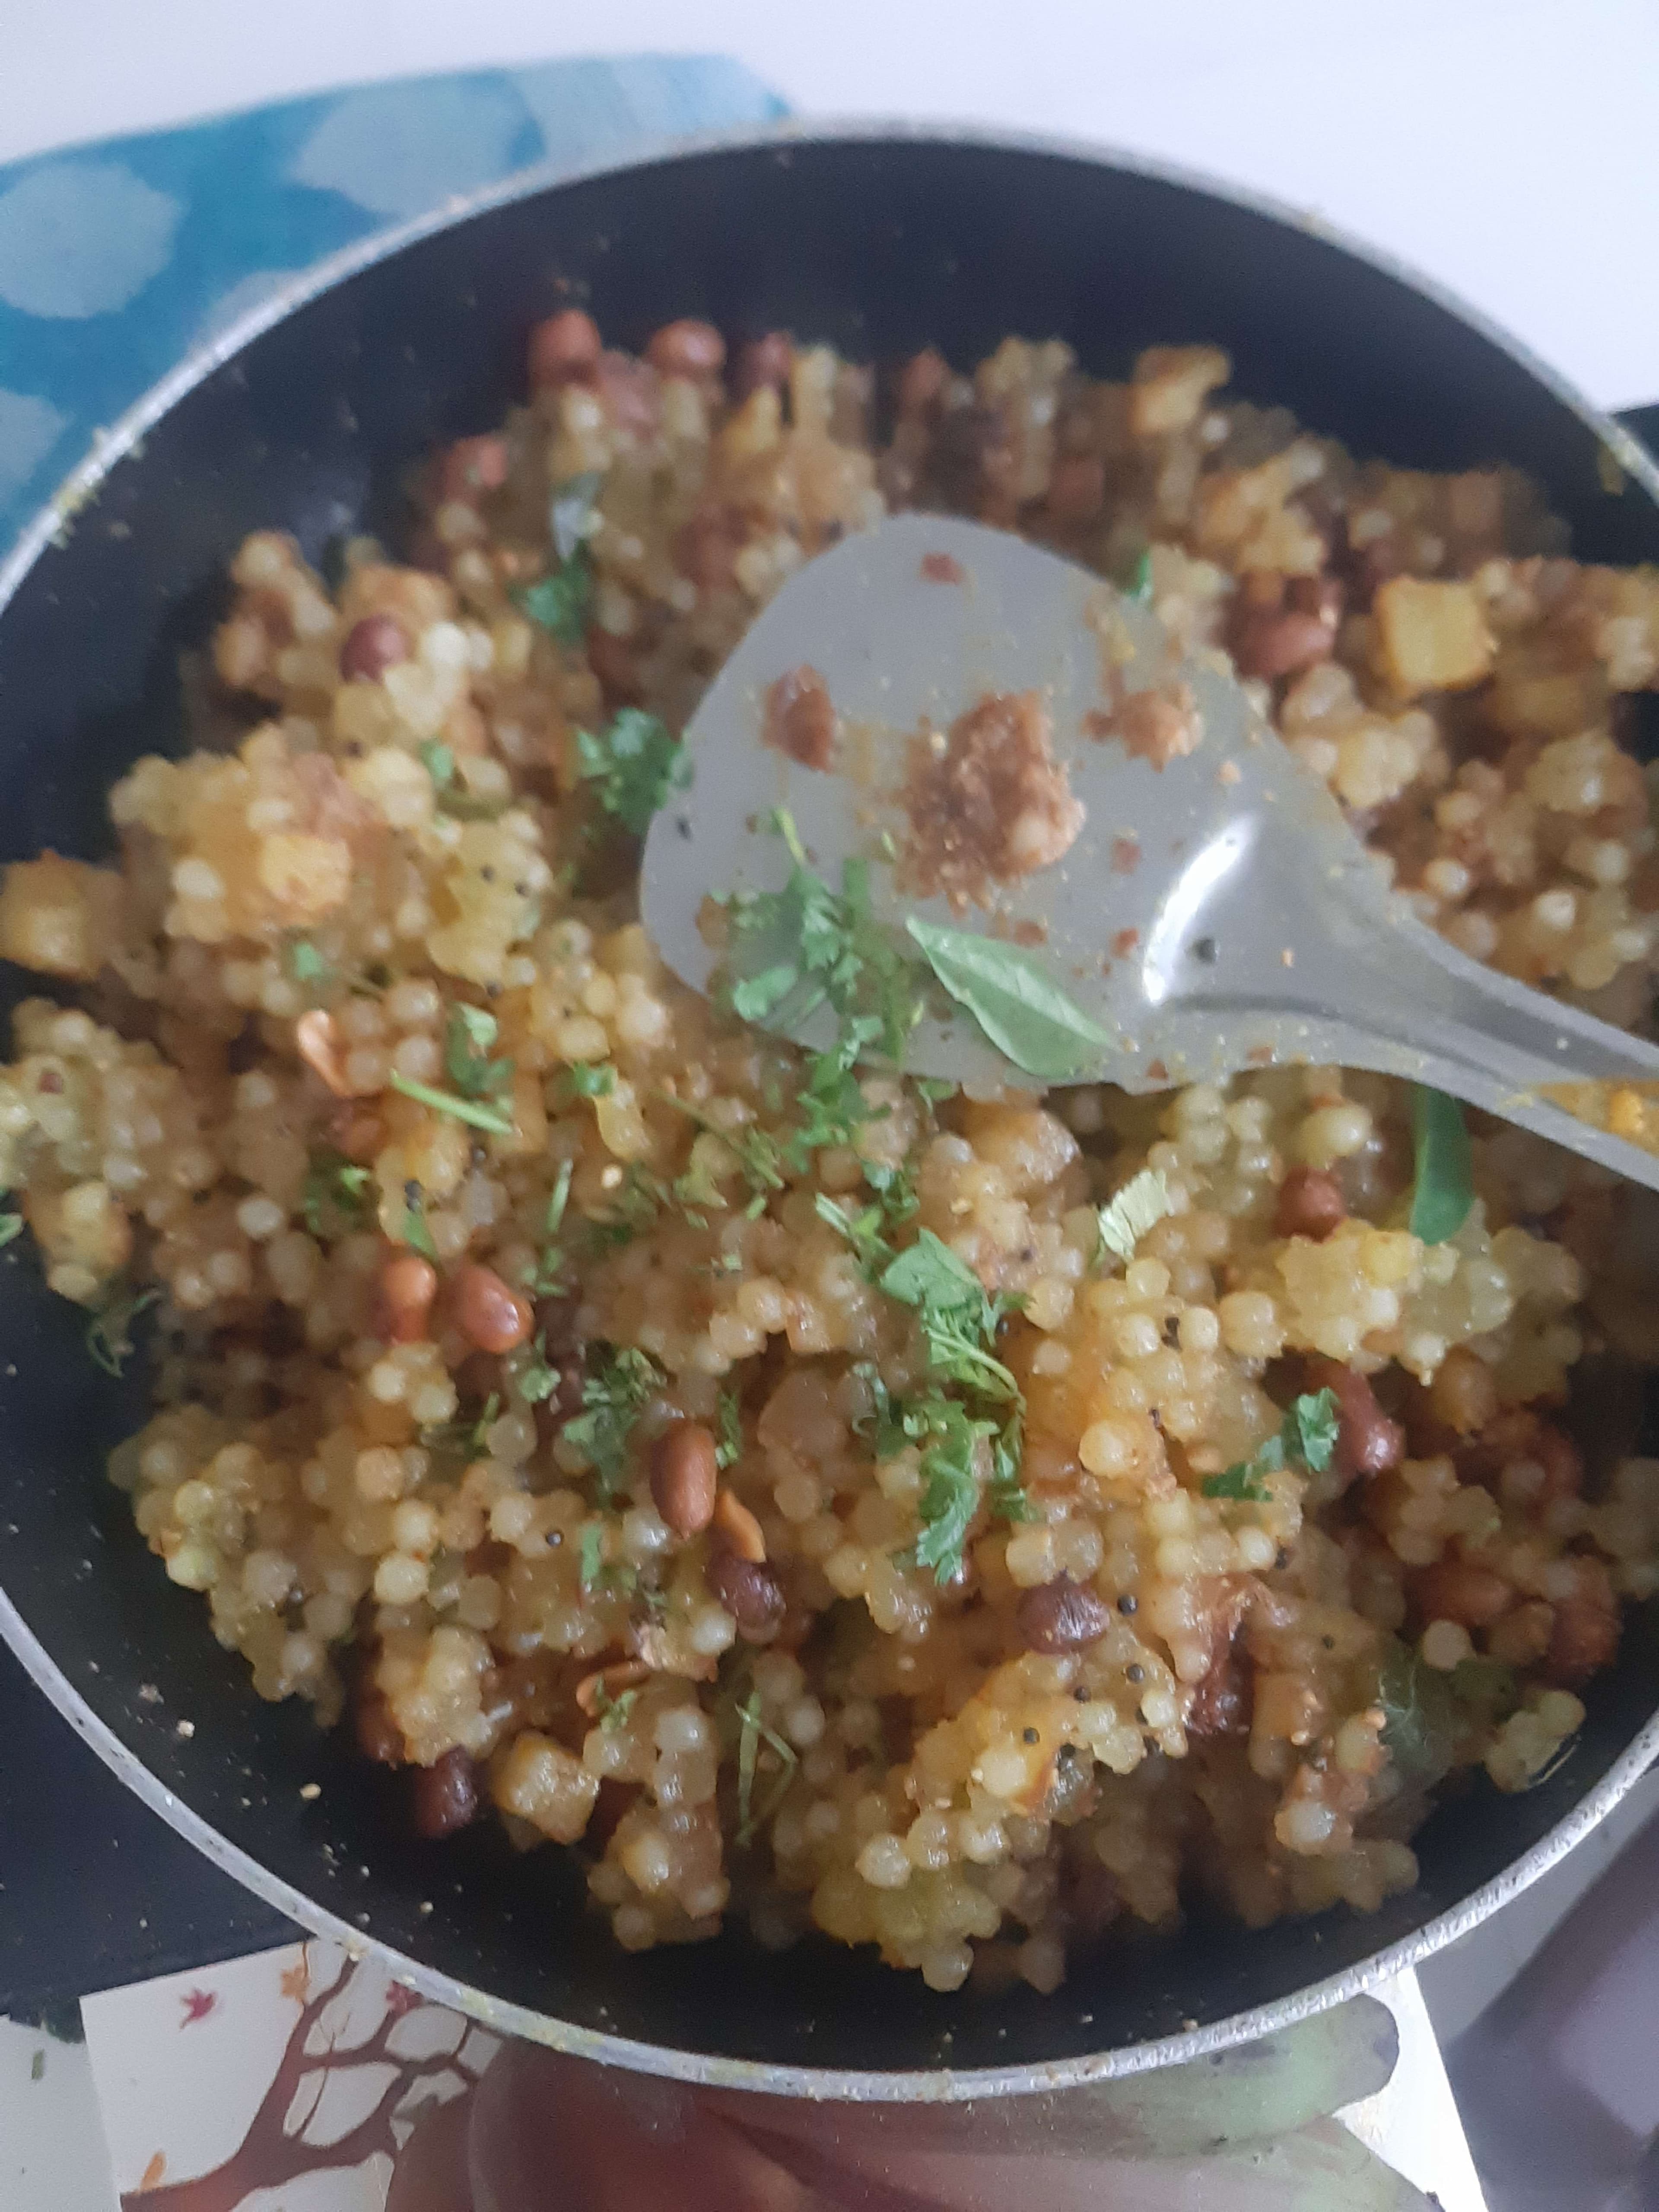 Tasty Sabudana Khichdi cooked by COOX chefs cooks during occasions parties events at home